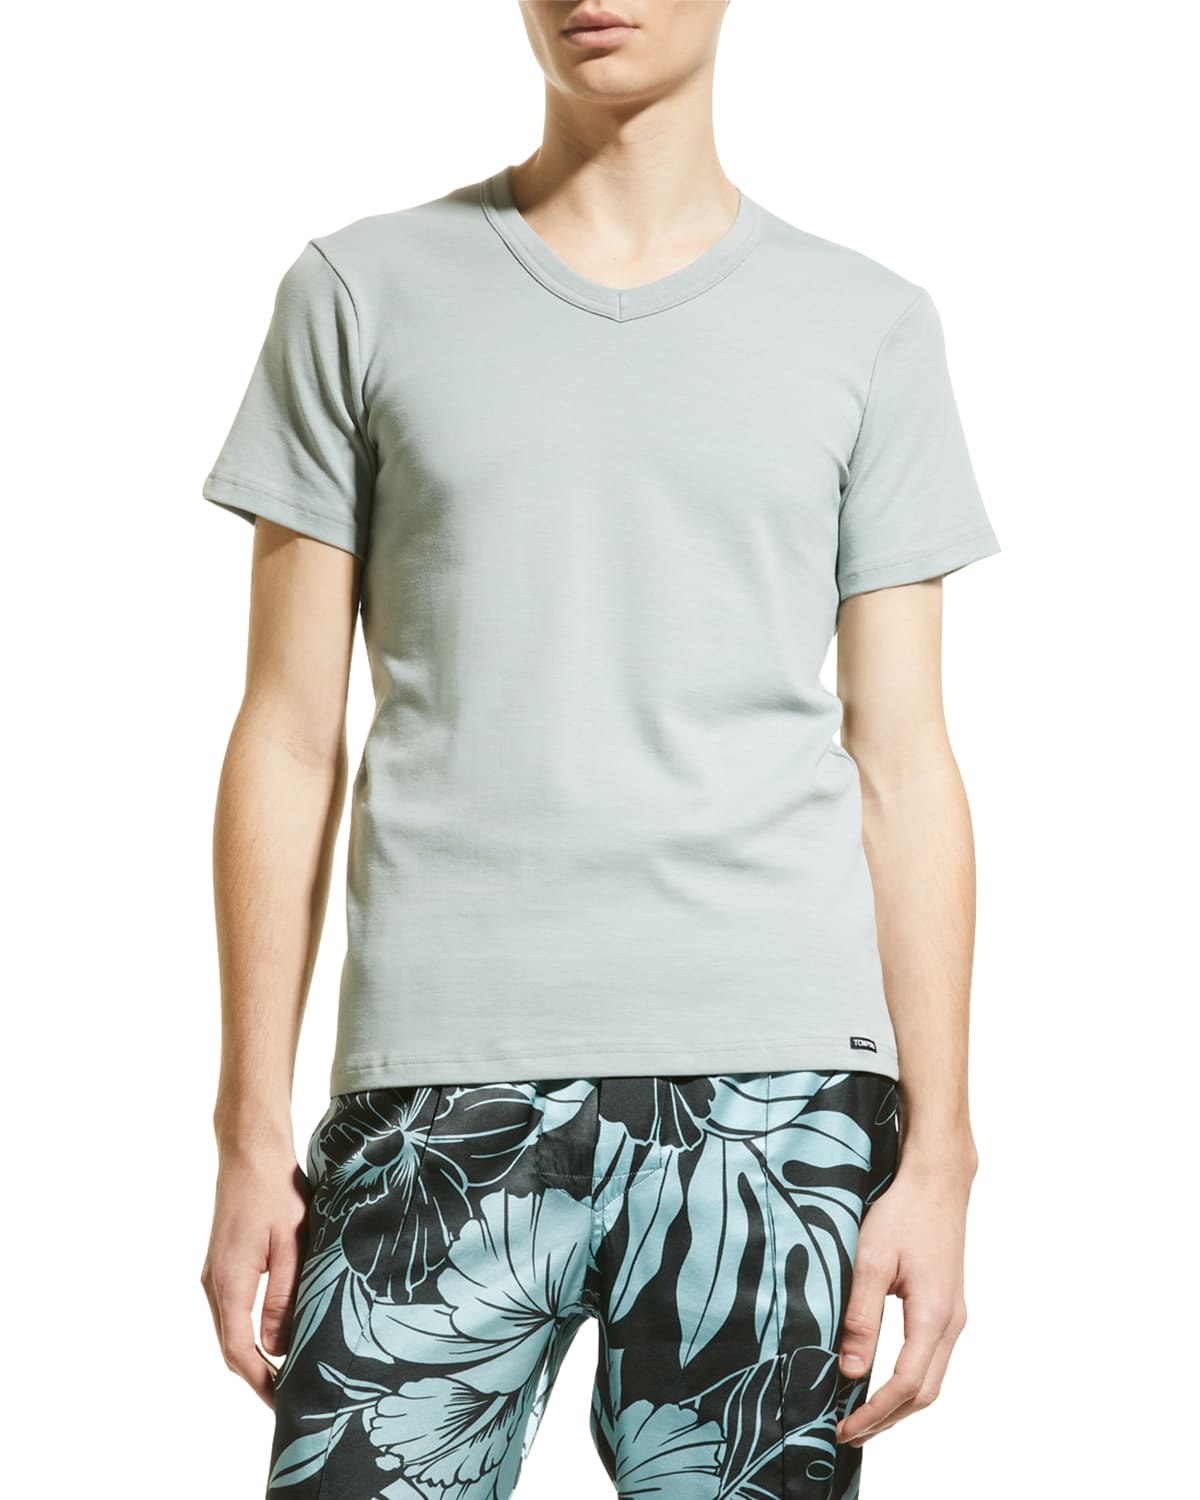 TOM FORD Men's Cotton Stretch Jersey T-shirt